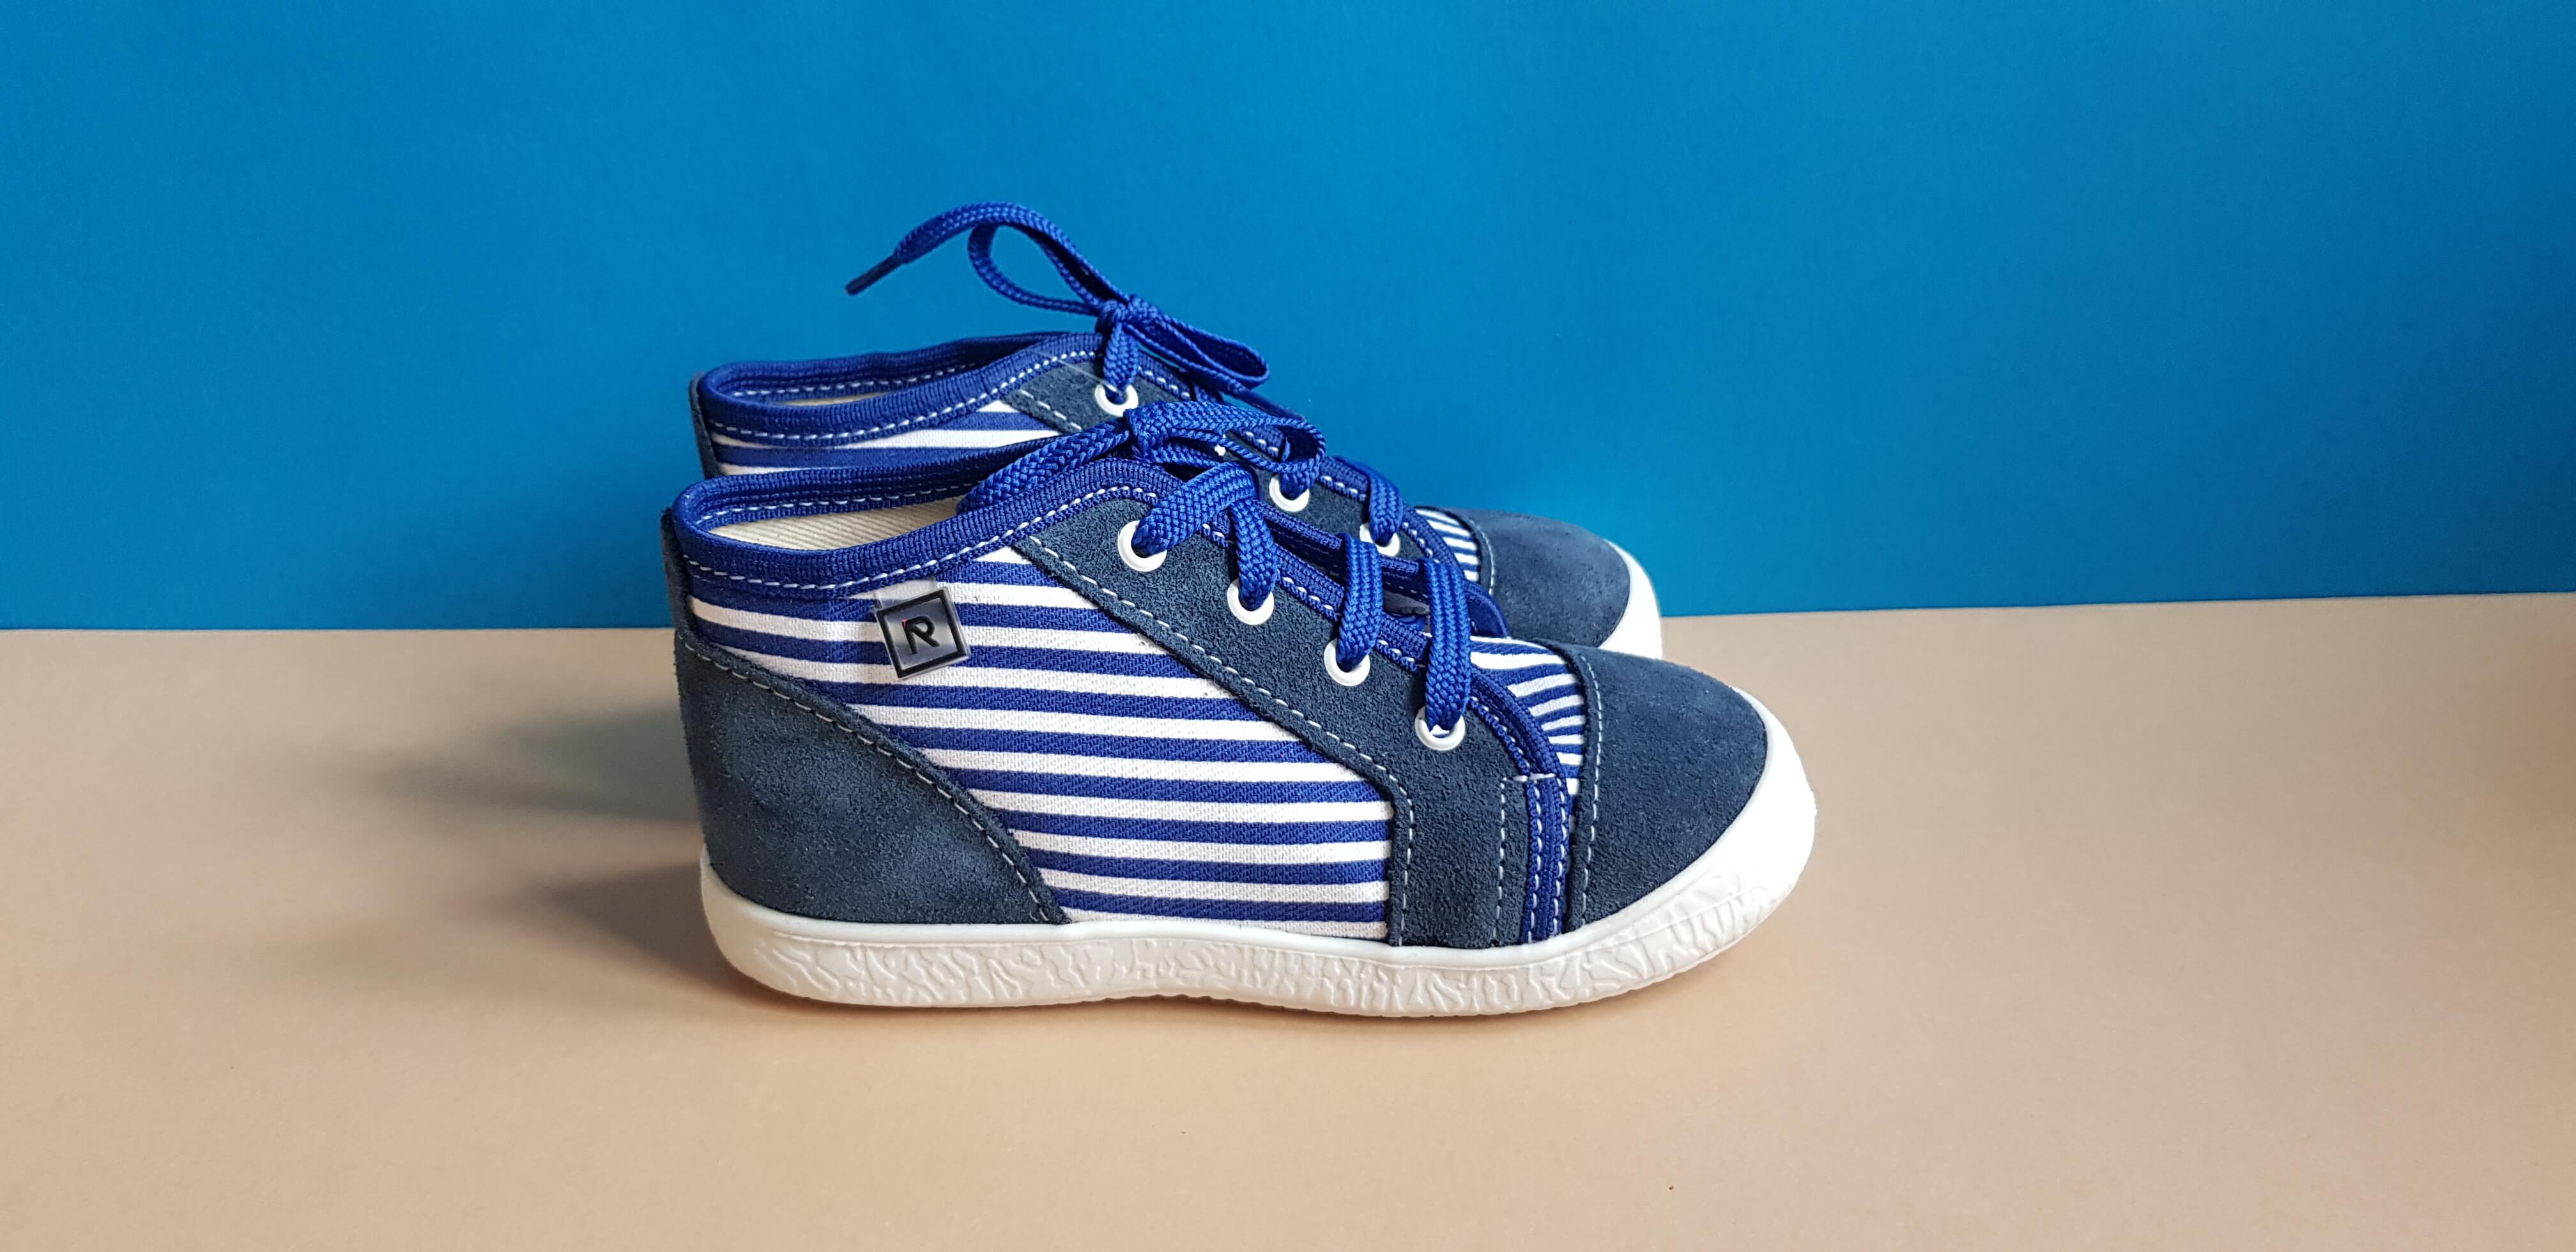 Blue stripey Handmade high-quality canvas and leather children shoes with white sole,laces and round toe box